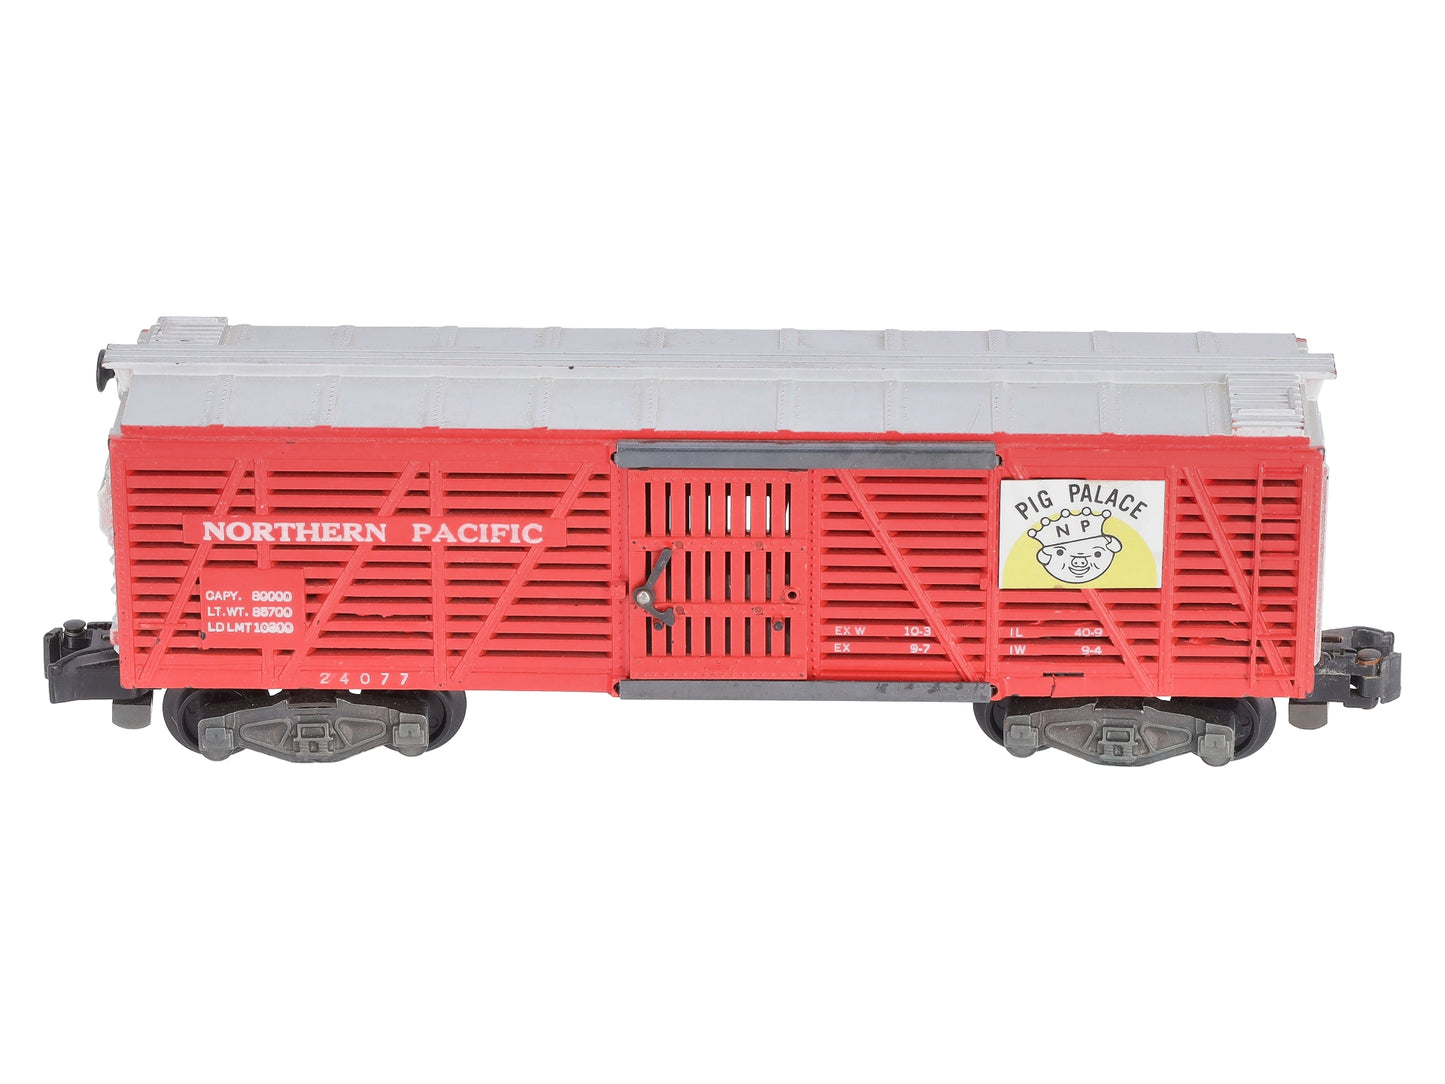 American Flyer 24077 Vintage S Northern Pacific Pig Palace Stock Car EX